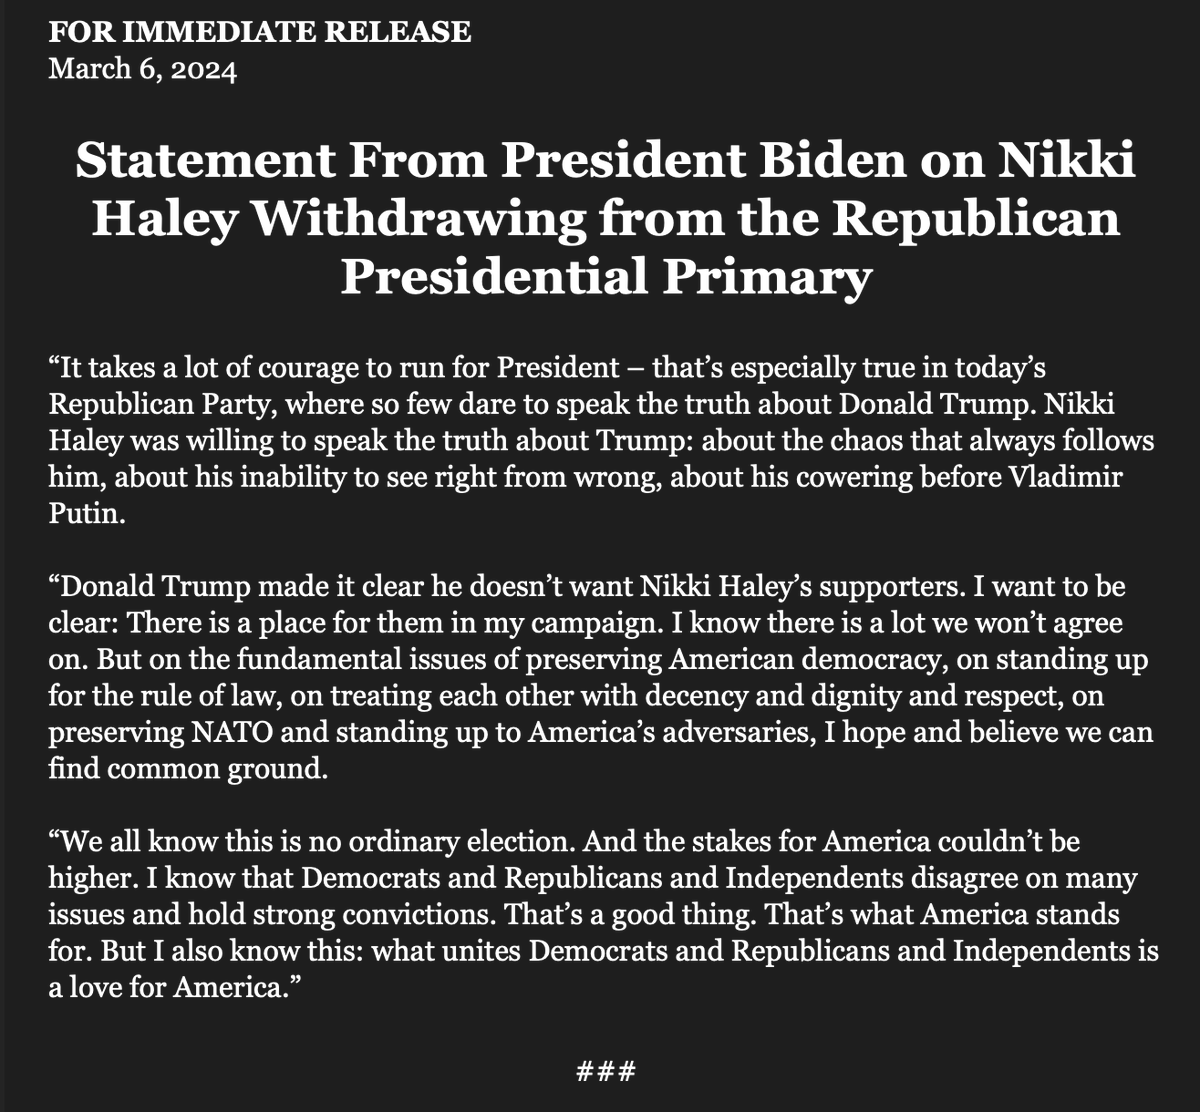 President @JoeBiden's campaign statement following Nikki Haley's campaign suspension. 'Donald Trump made it clear he doesn’t want Nikki Haley’s supporters. I want to be clear: There is a place for them in my campaign.'